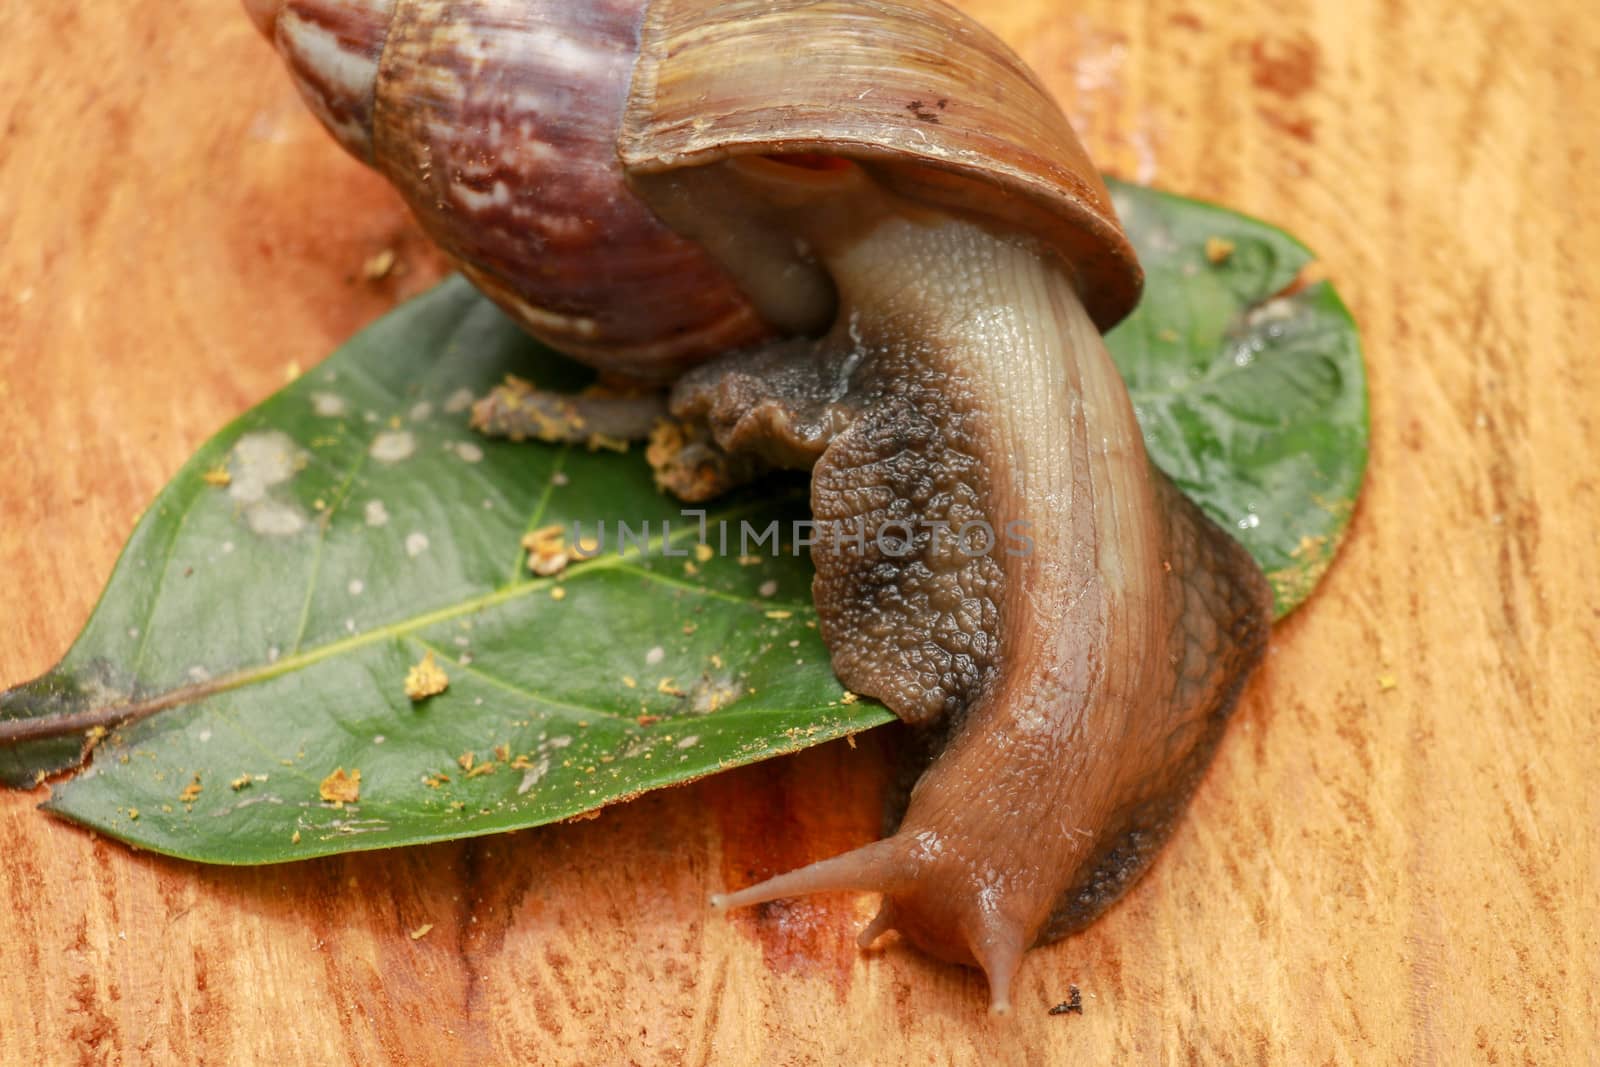 Beautiful patterned brown snail crawls on a wooden surface. Giant african snail.